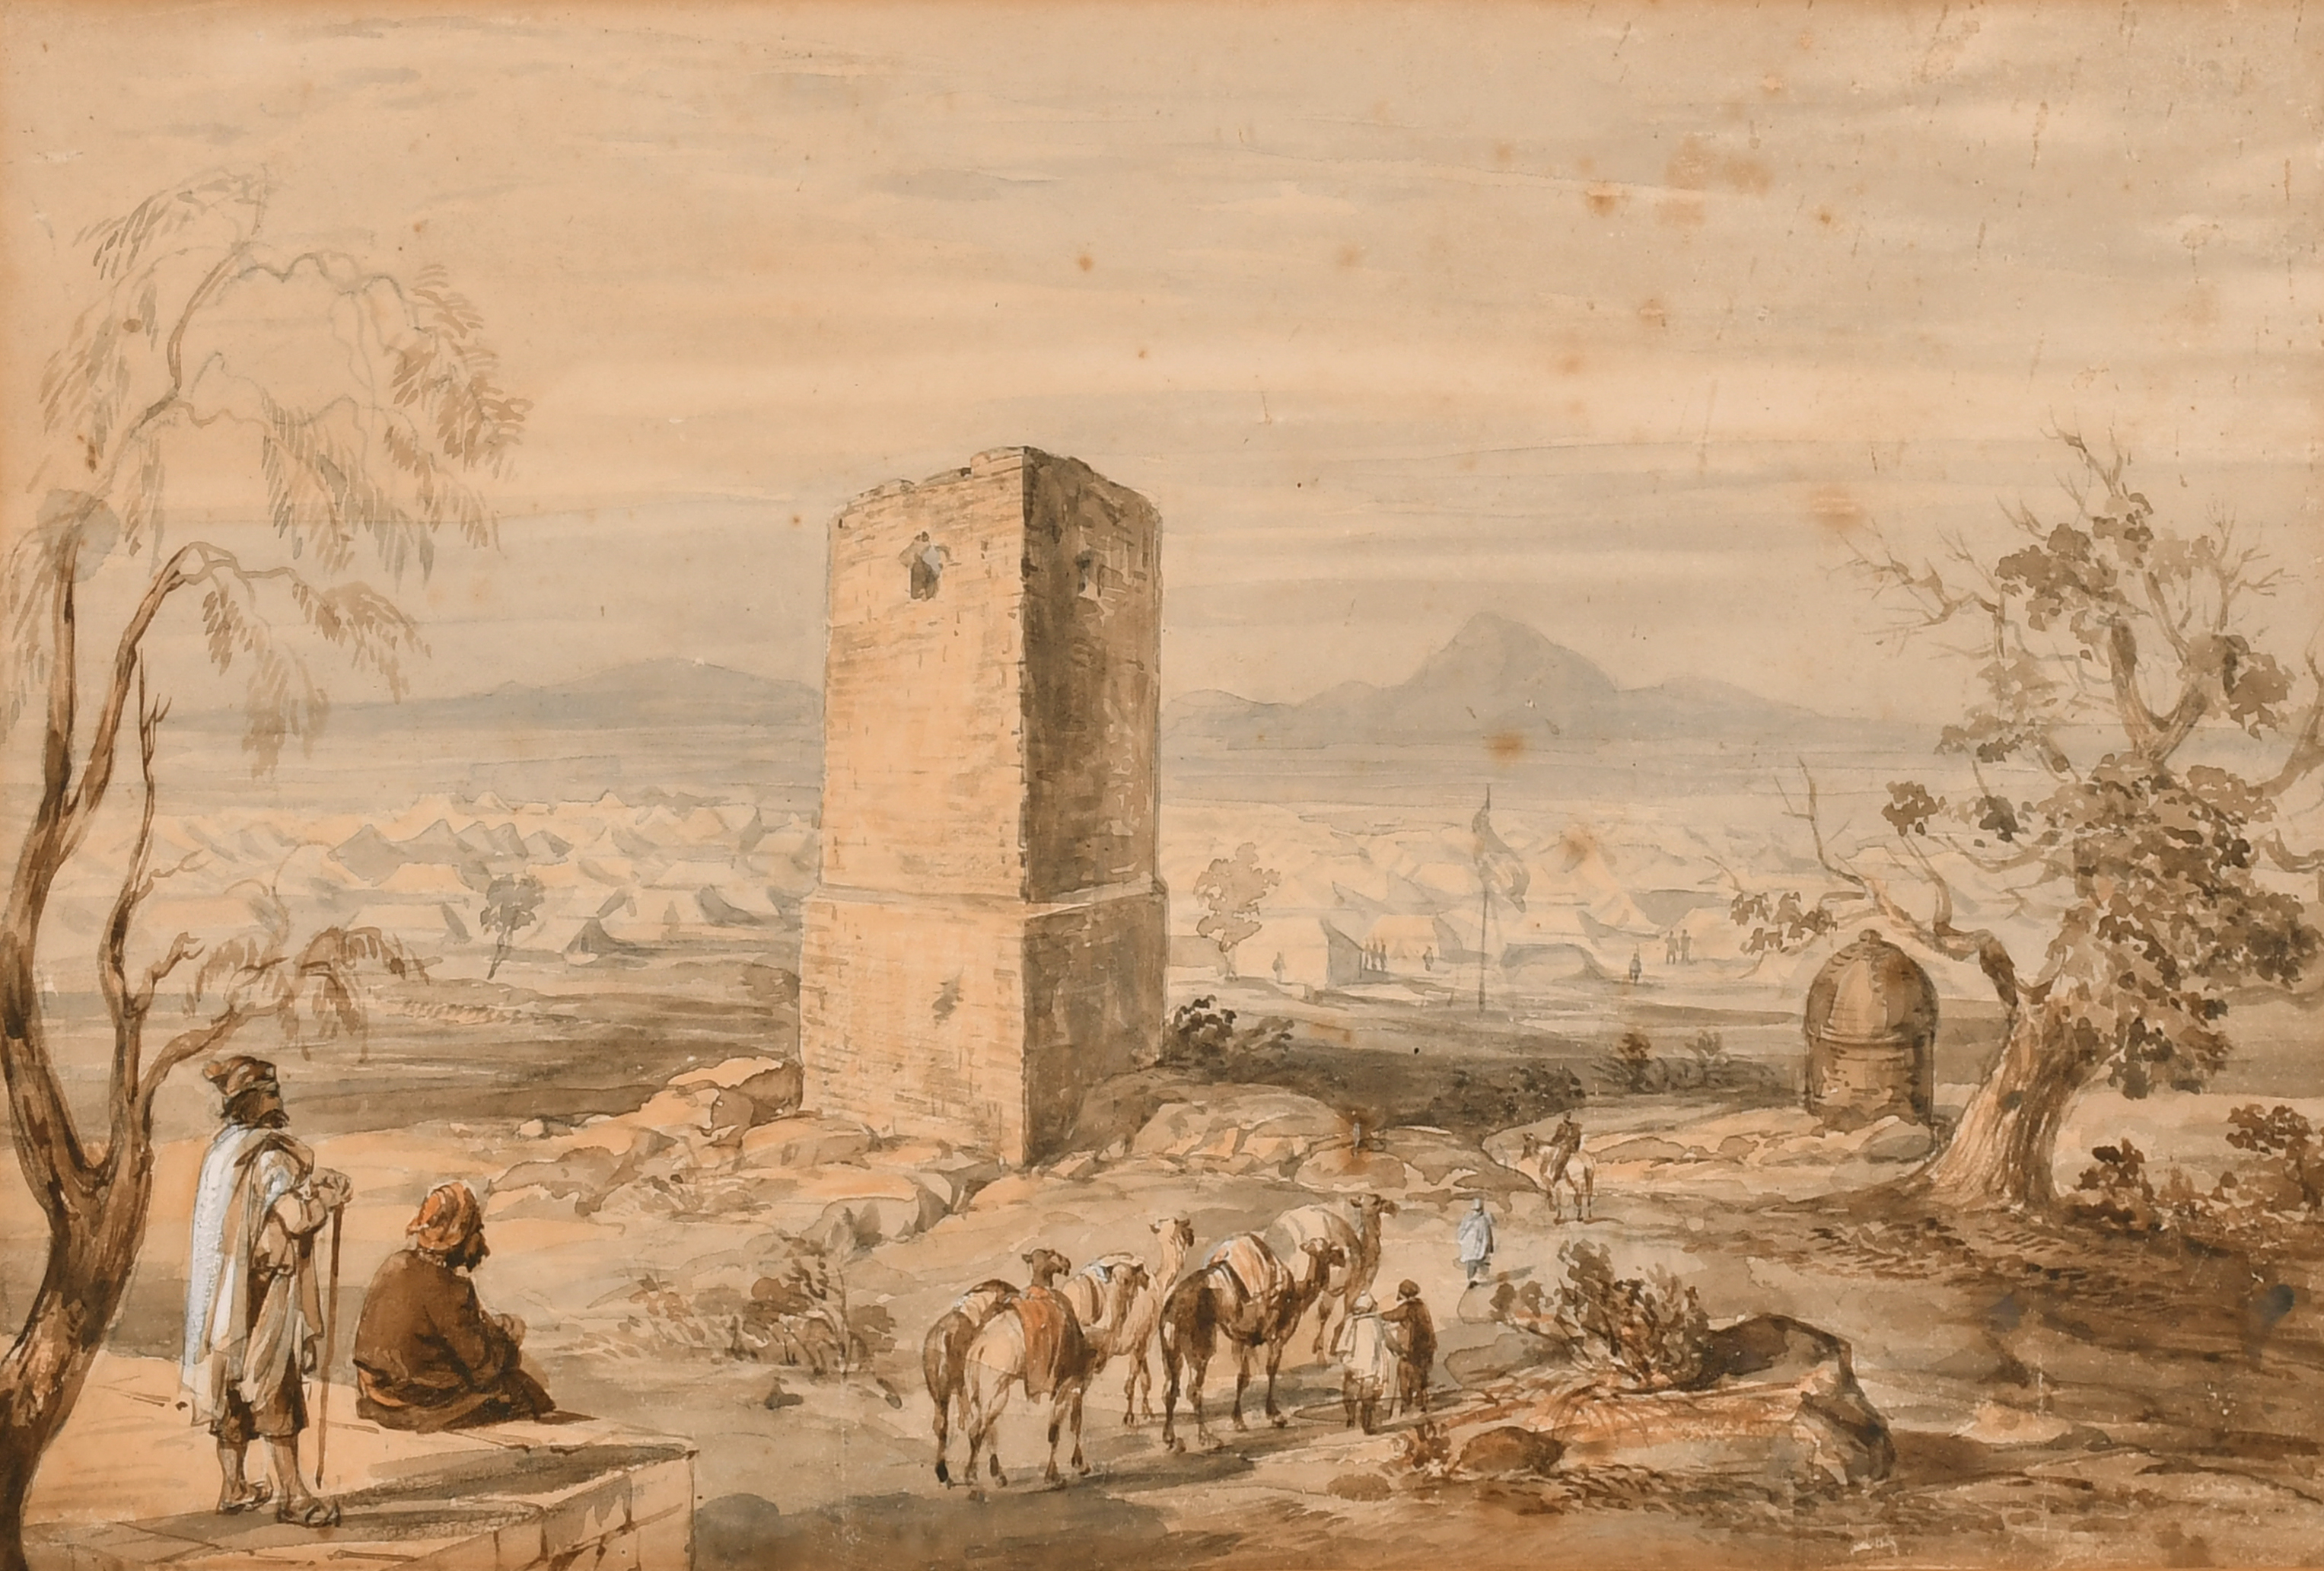 19th Century English School. A Middle Eastern Scene with Figures and Camels, Watercolour, 9" x 13.5"